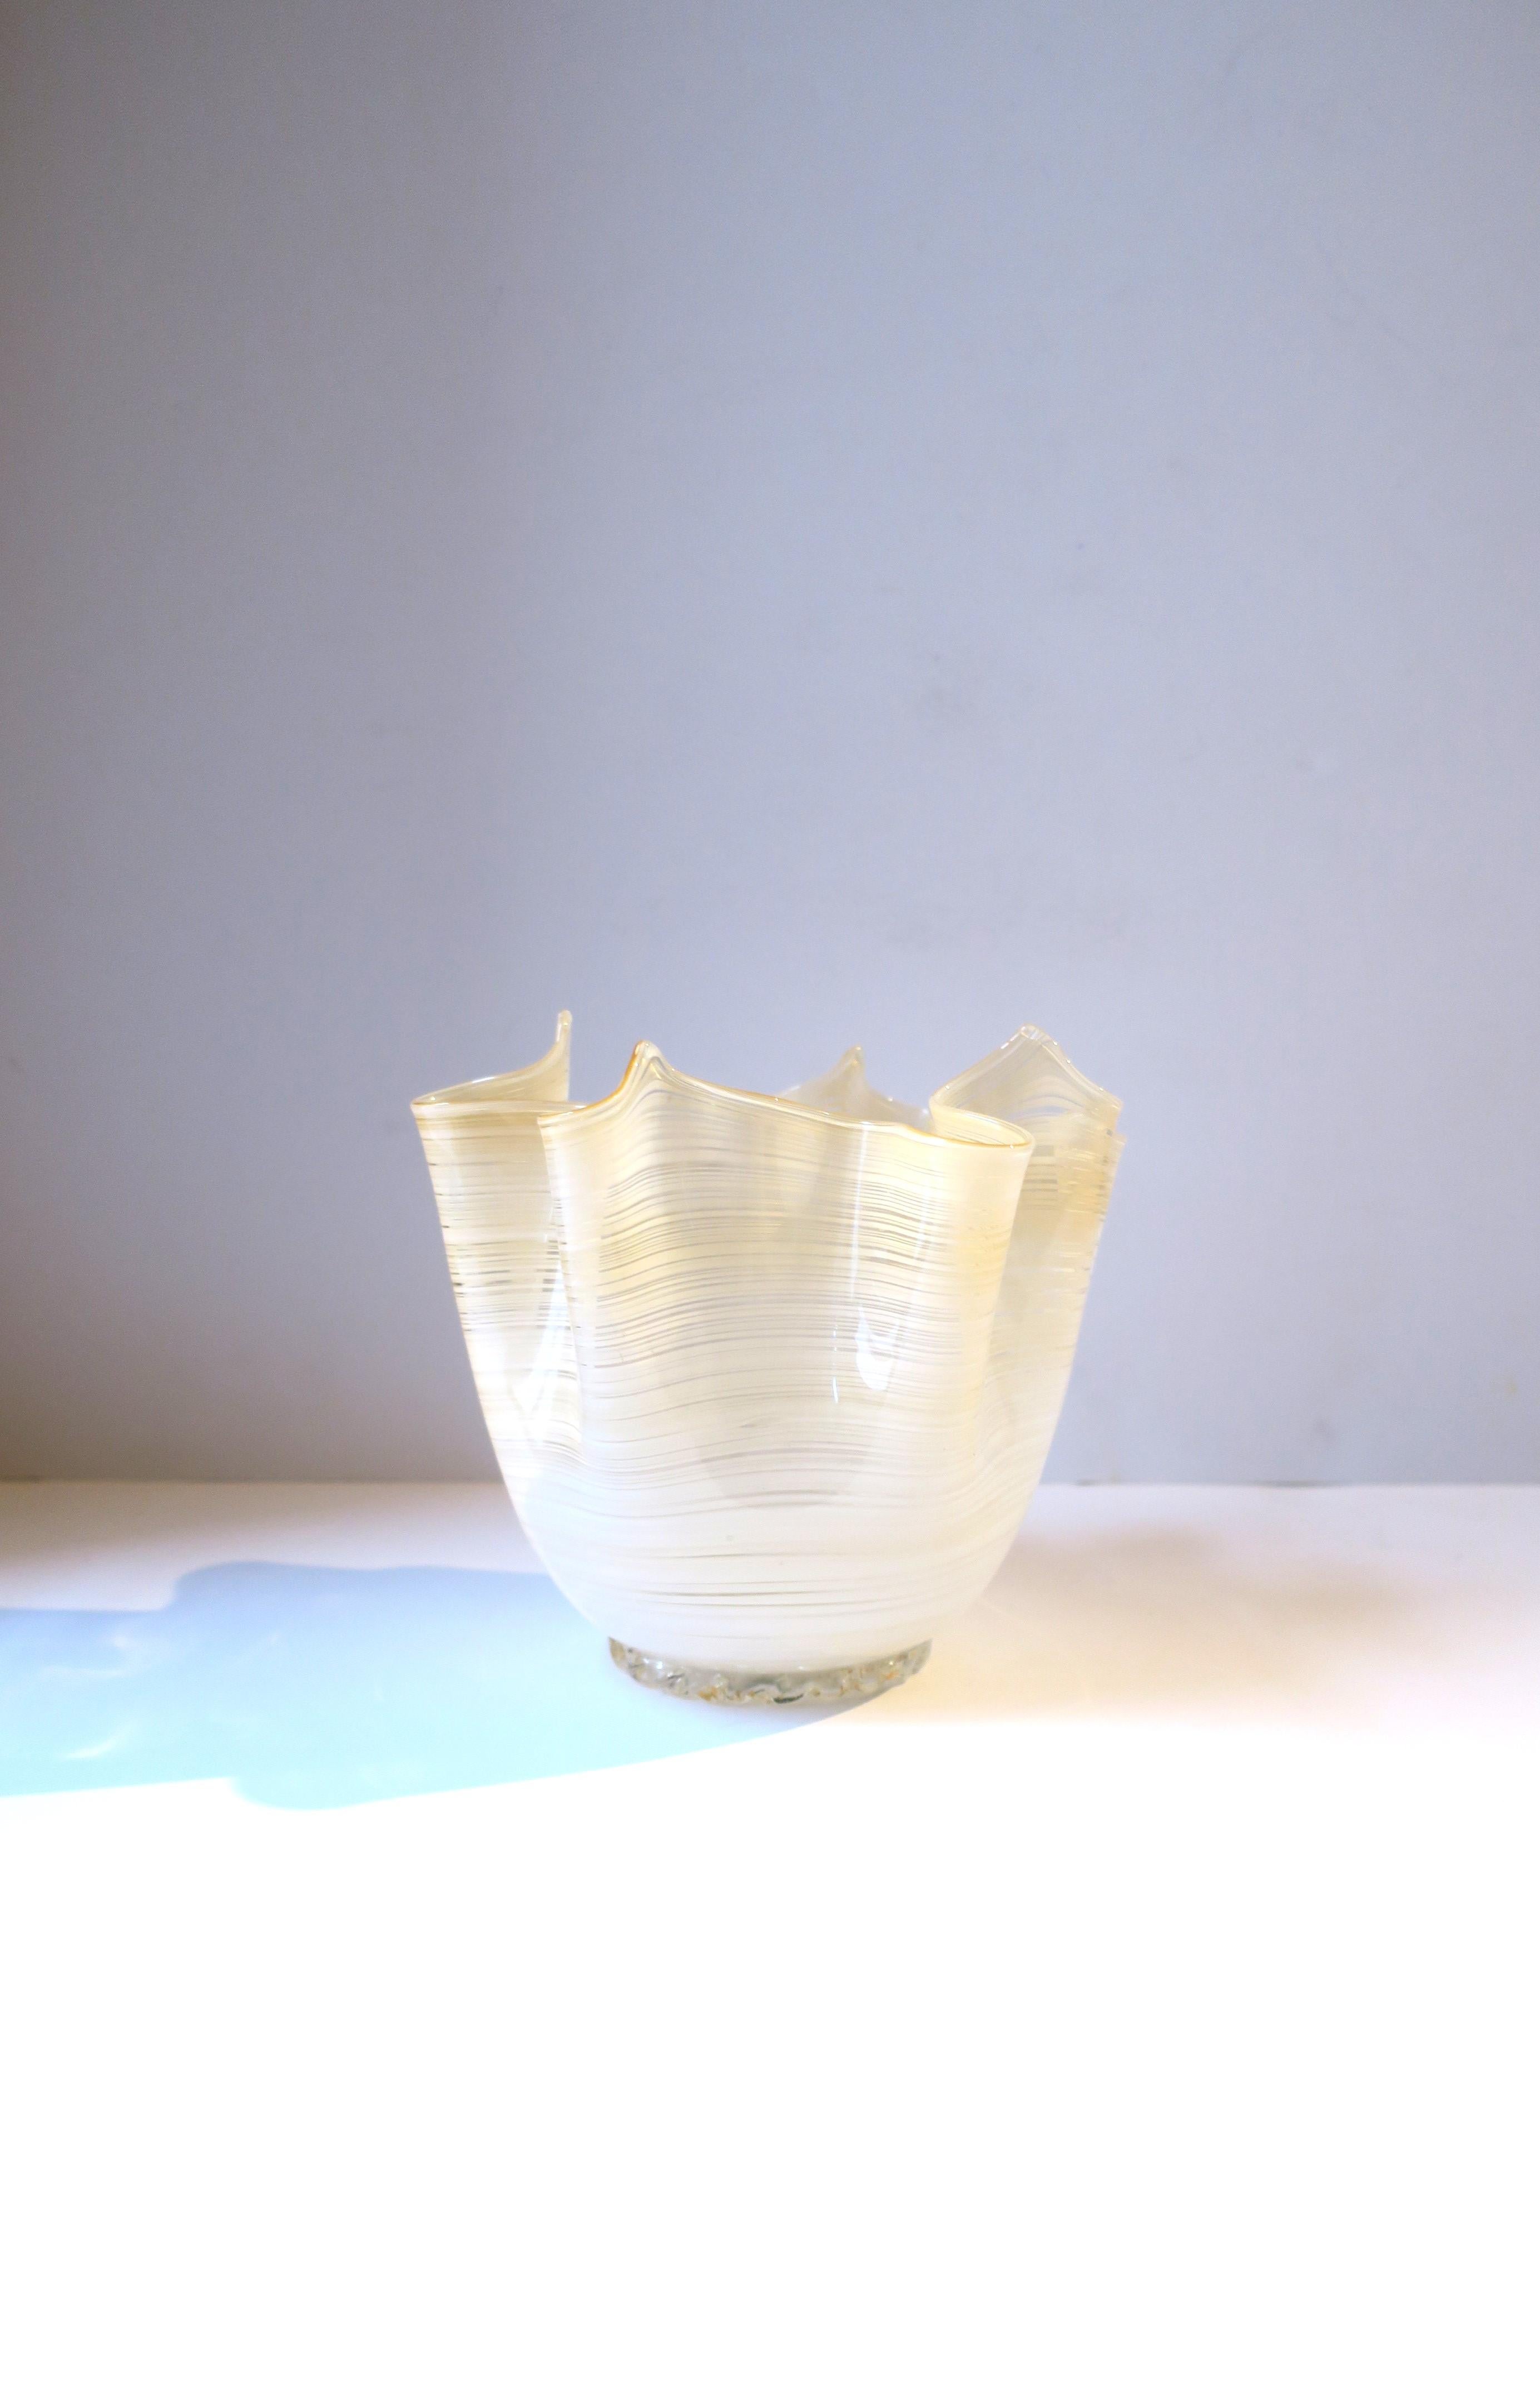 A beautiful authentic Italian Venetian Murano art glass handkerchief vase, in the Modern style, circa early-20th century, 1940s, Italy. This beautiful handcrafted piece has white and neutral art glass tones and ombre flow. Base is clear transparent